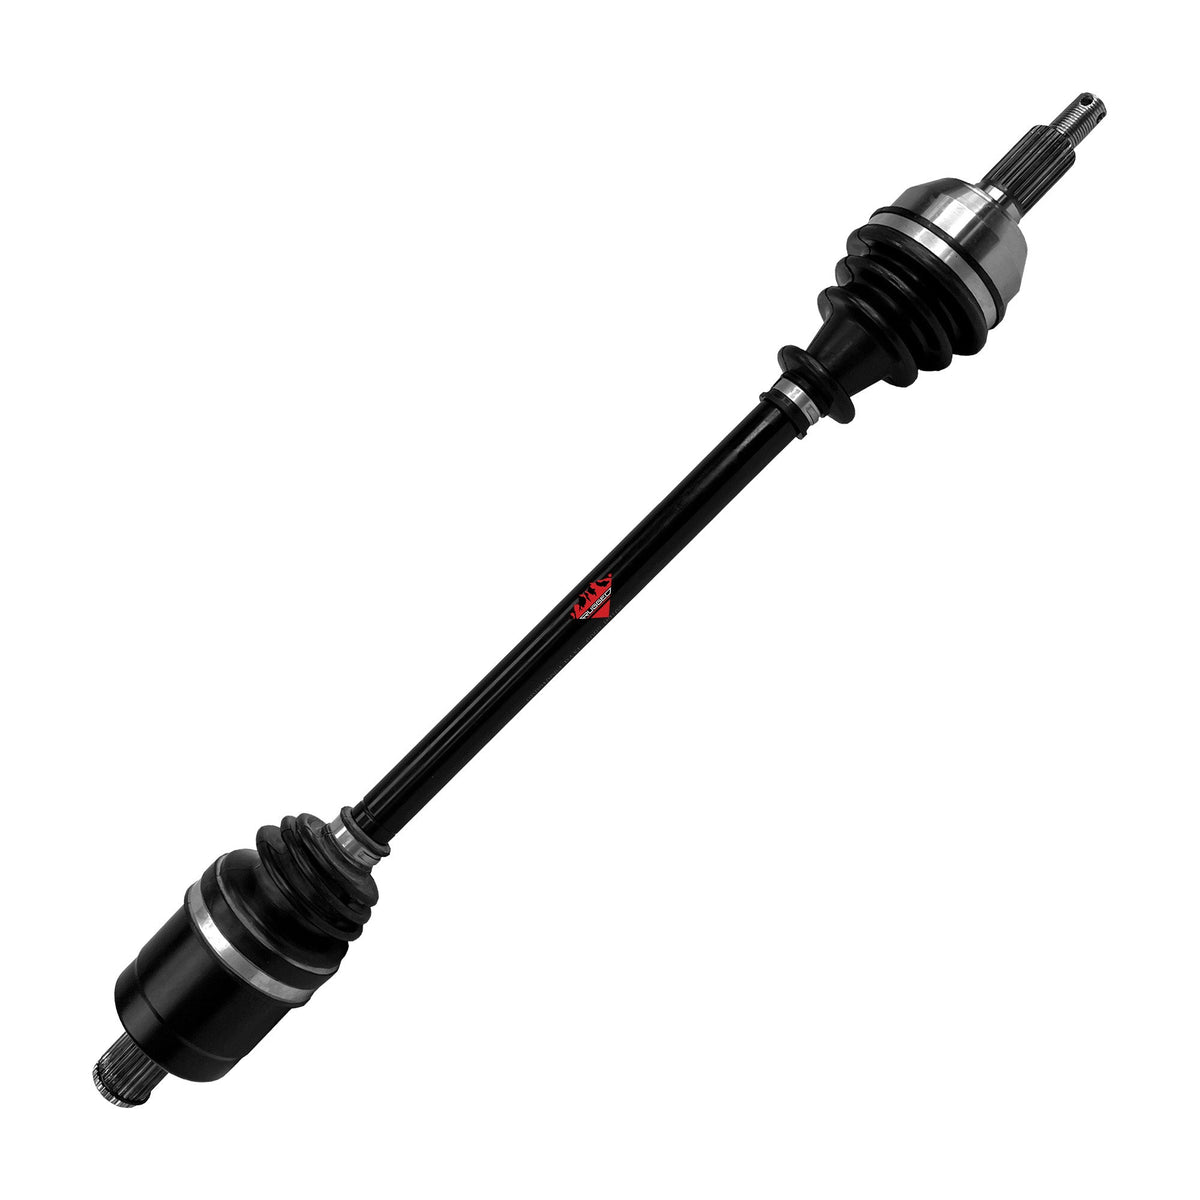 Arctic Cat XR 700 Rugged Performance Axle